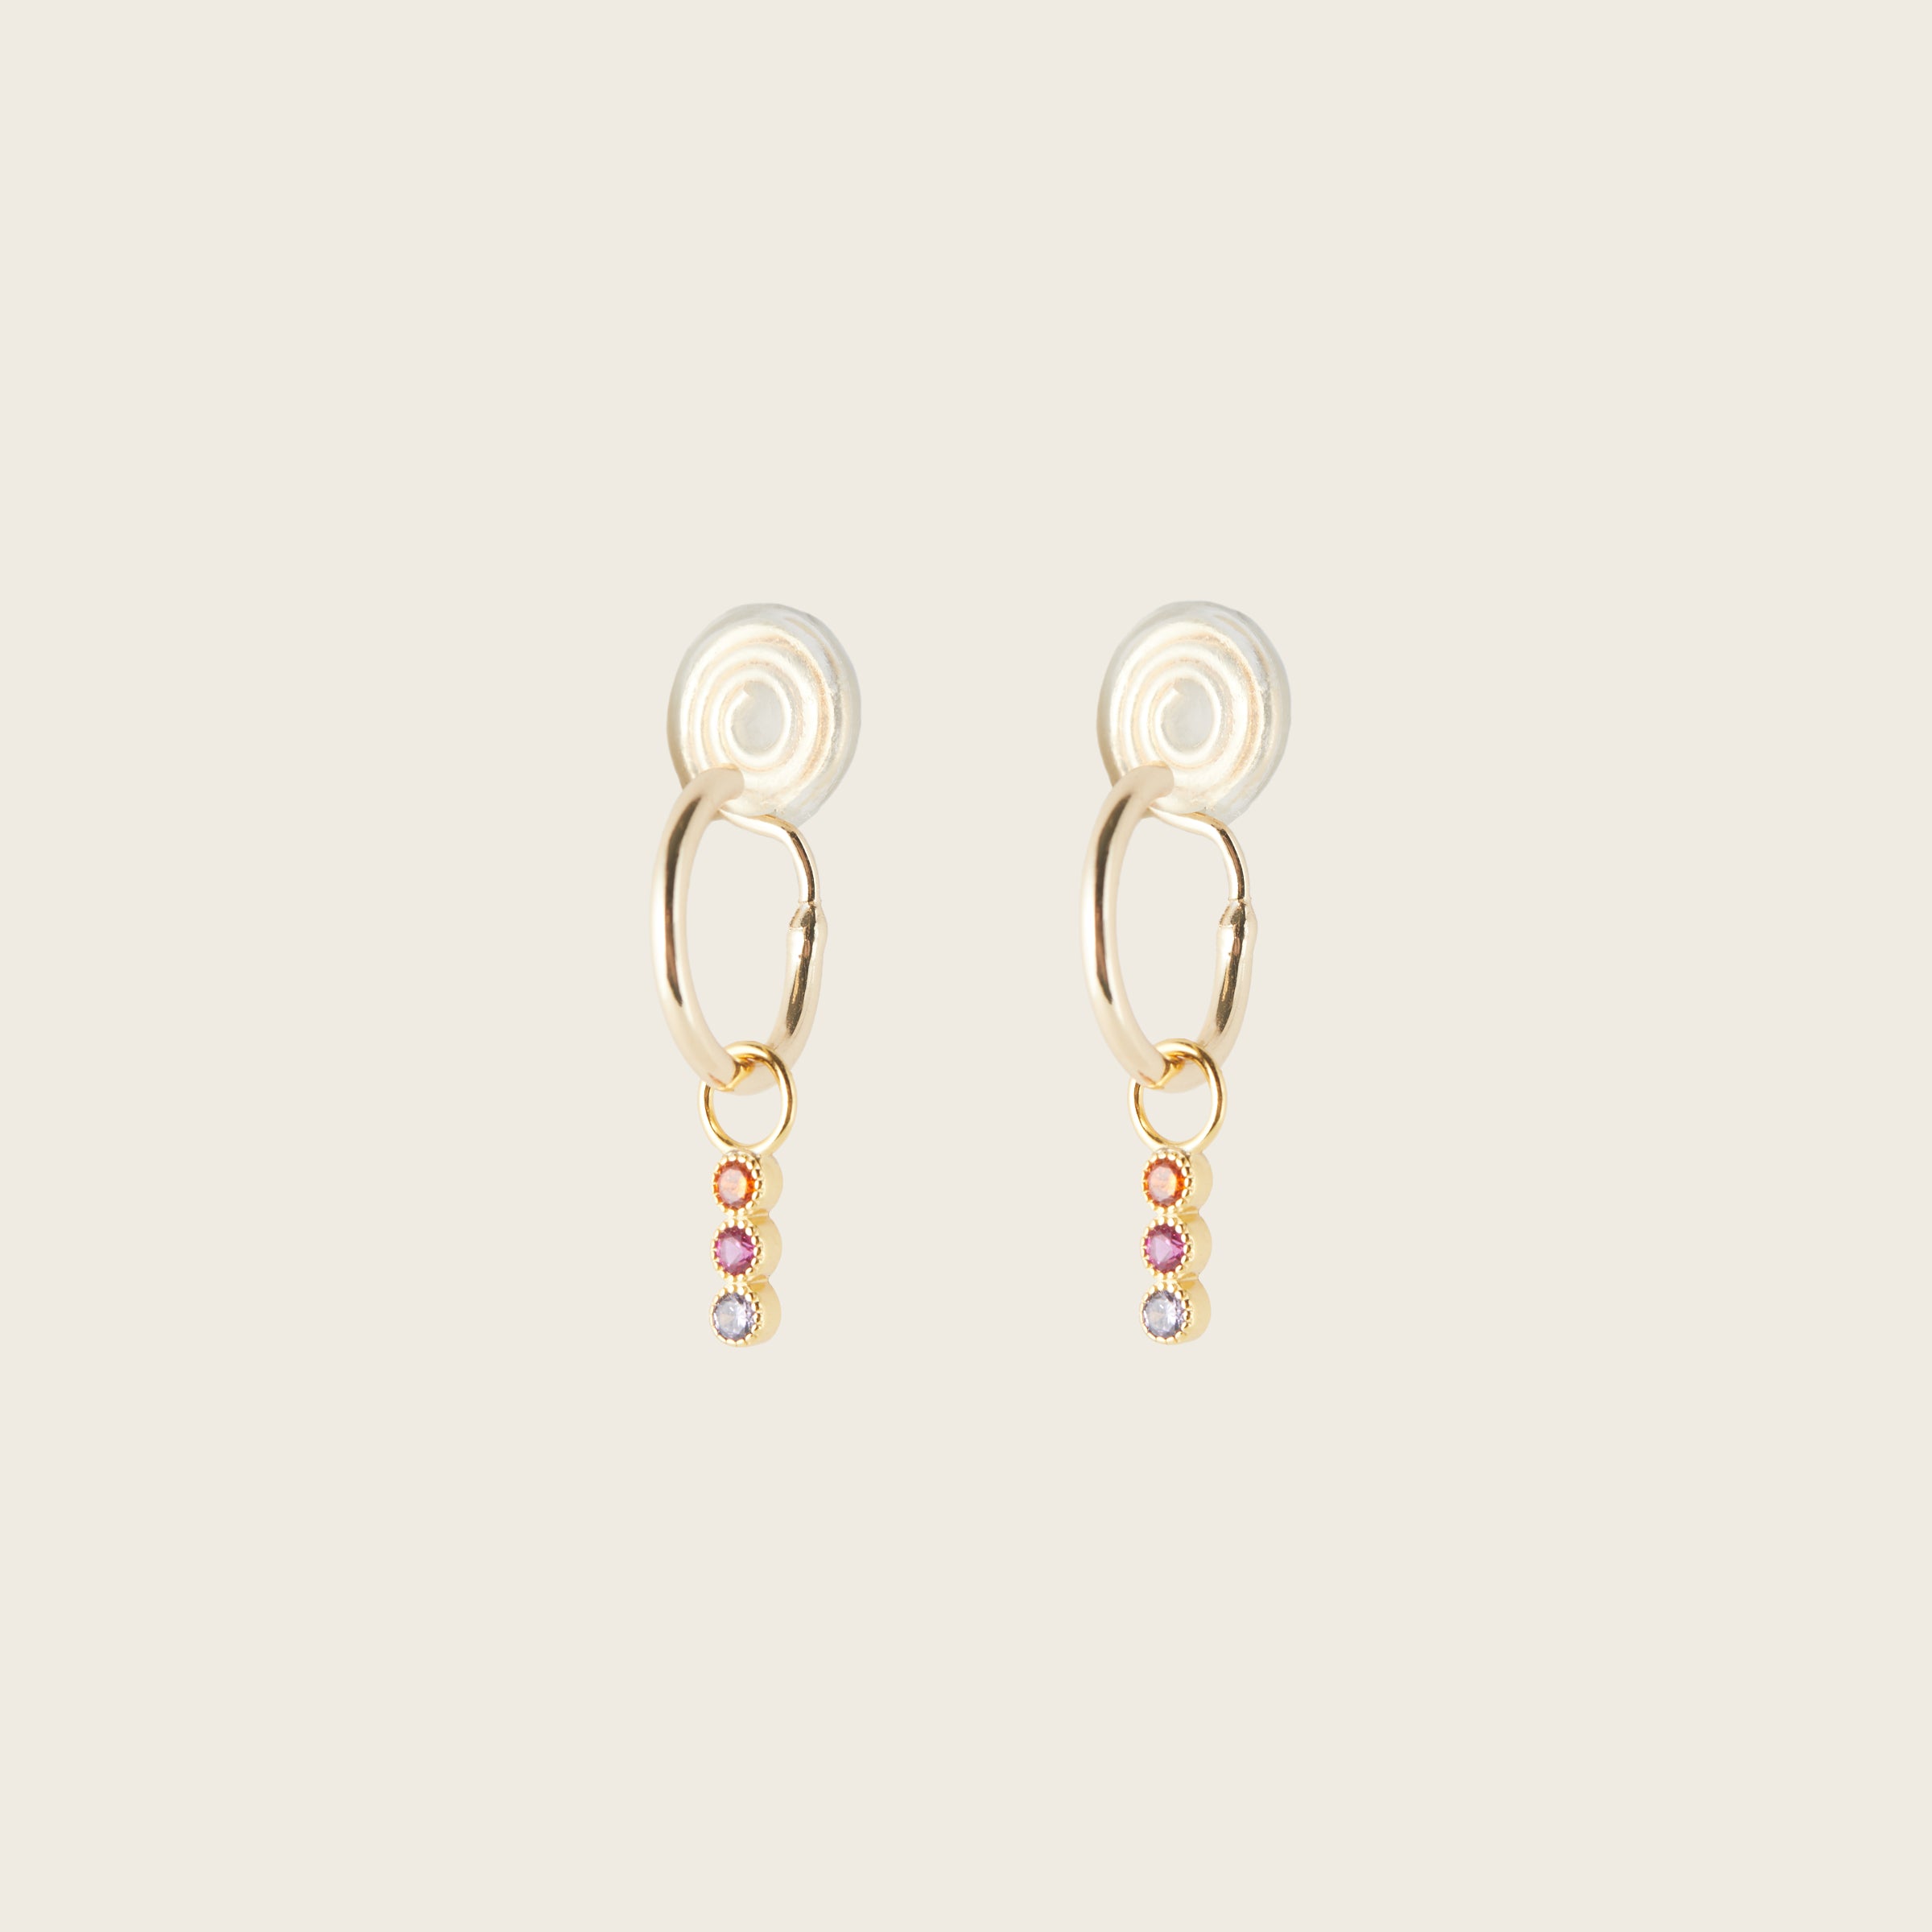 Image of the Sunset Hoop Charms are made with high-quality materials, including 18K gold plating over 925 Sterling Silver. These charms are both non-tarnish and water resistant. The perfect combination of style and durability.